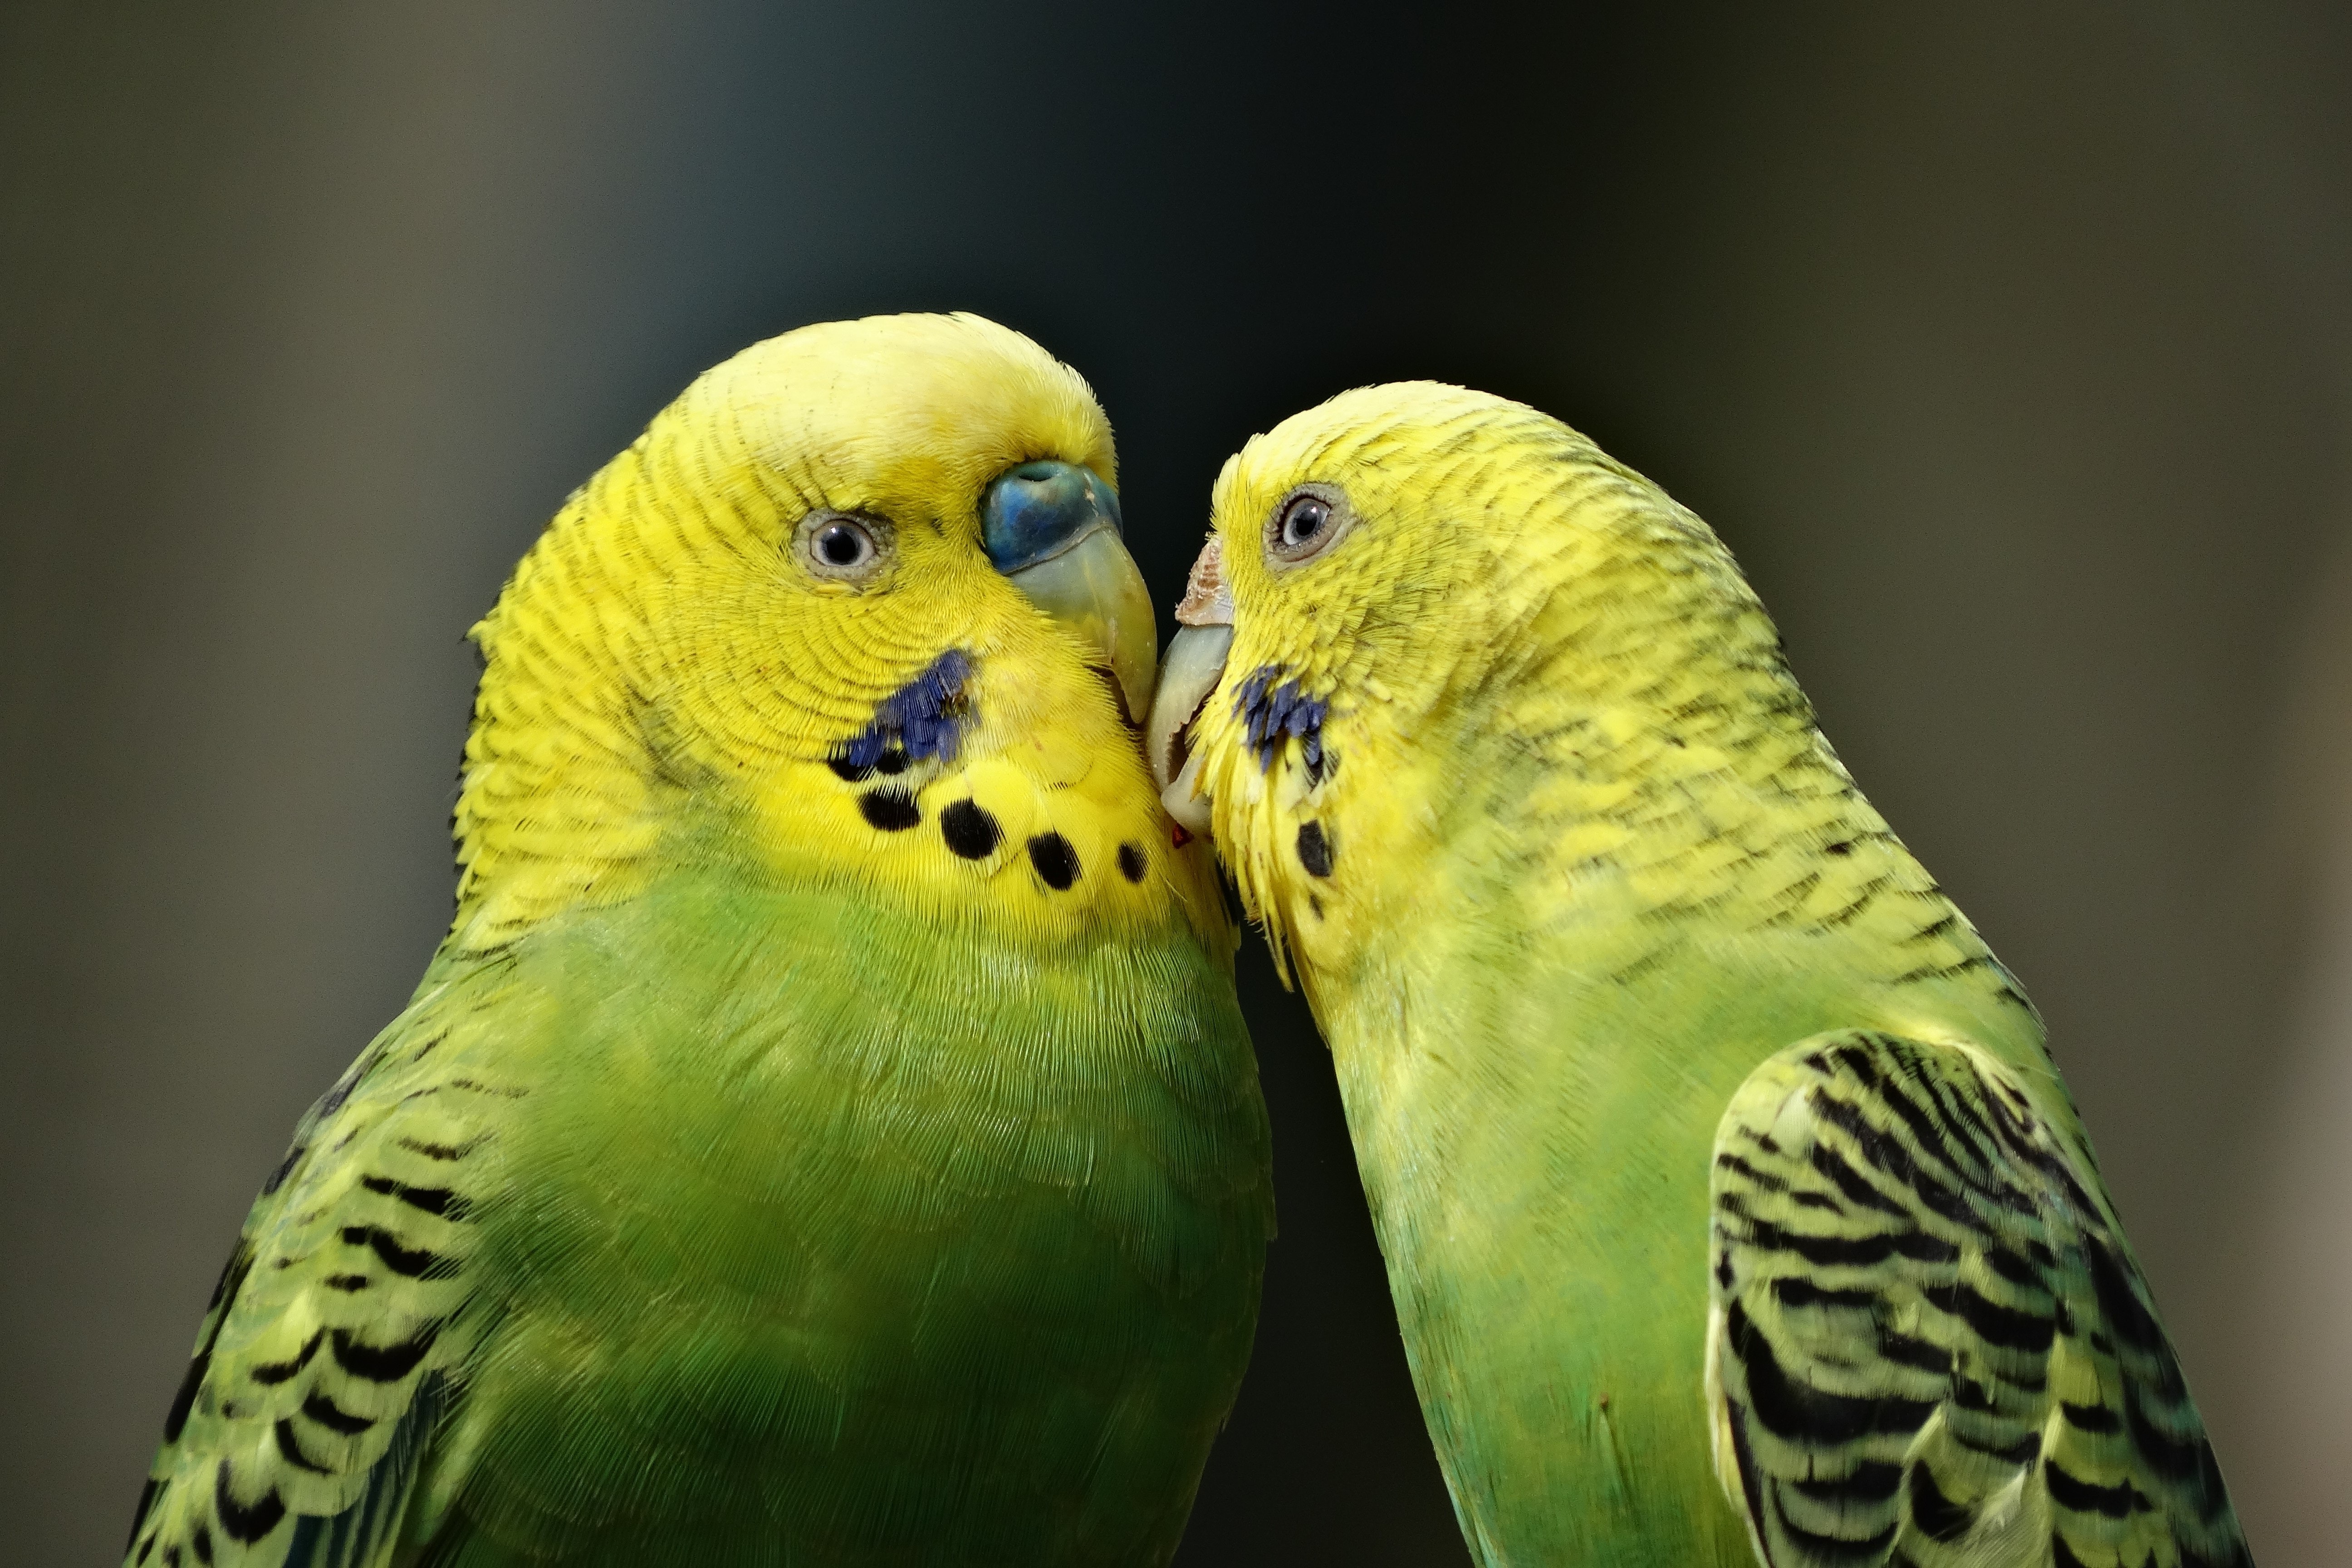 a pair of budgie parakeets groom each other's feathers